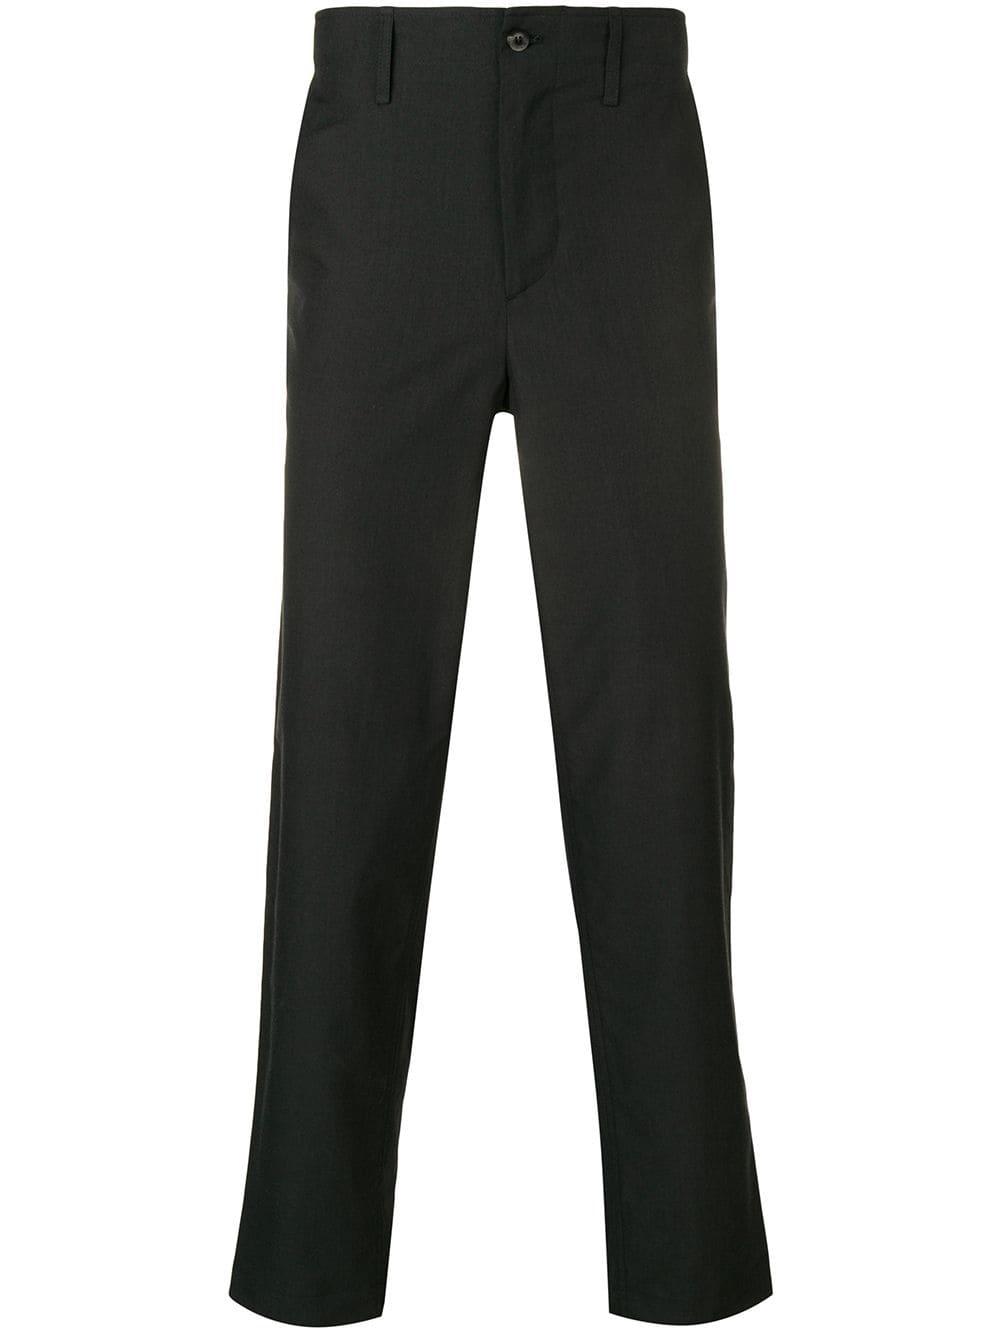 Etro Cotton Elasticated Waist Trousers in Black for Men - Lyst